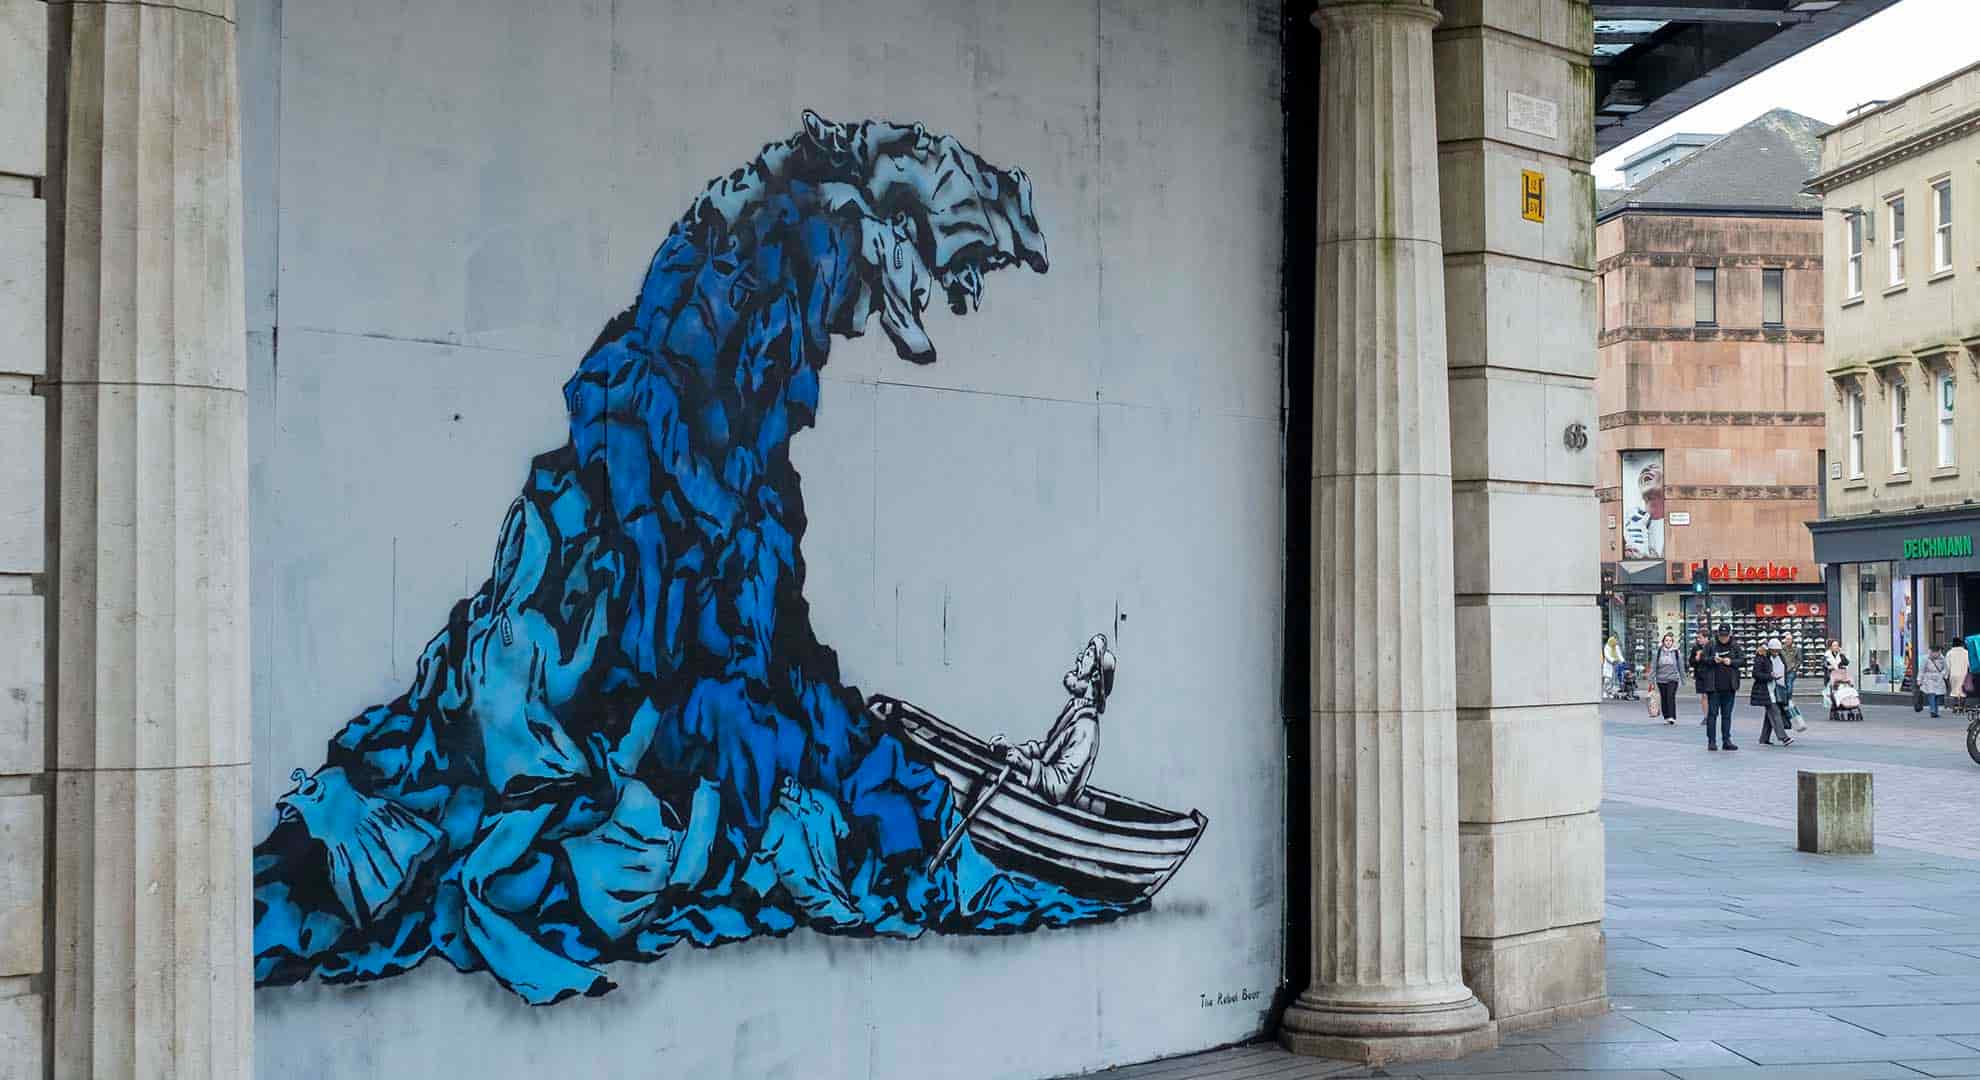 Street art depicting a wave of clothing created by The Rebel Bear in Glasgow Scotland